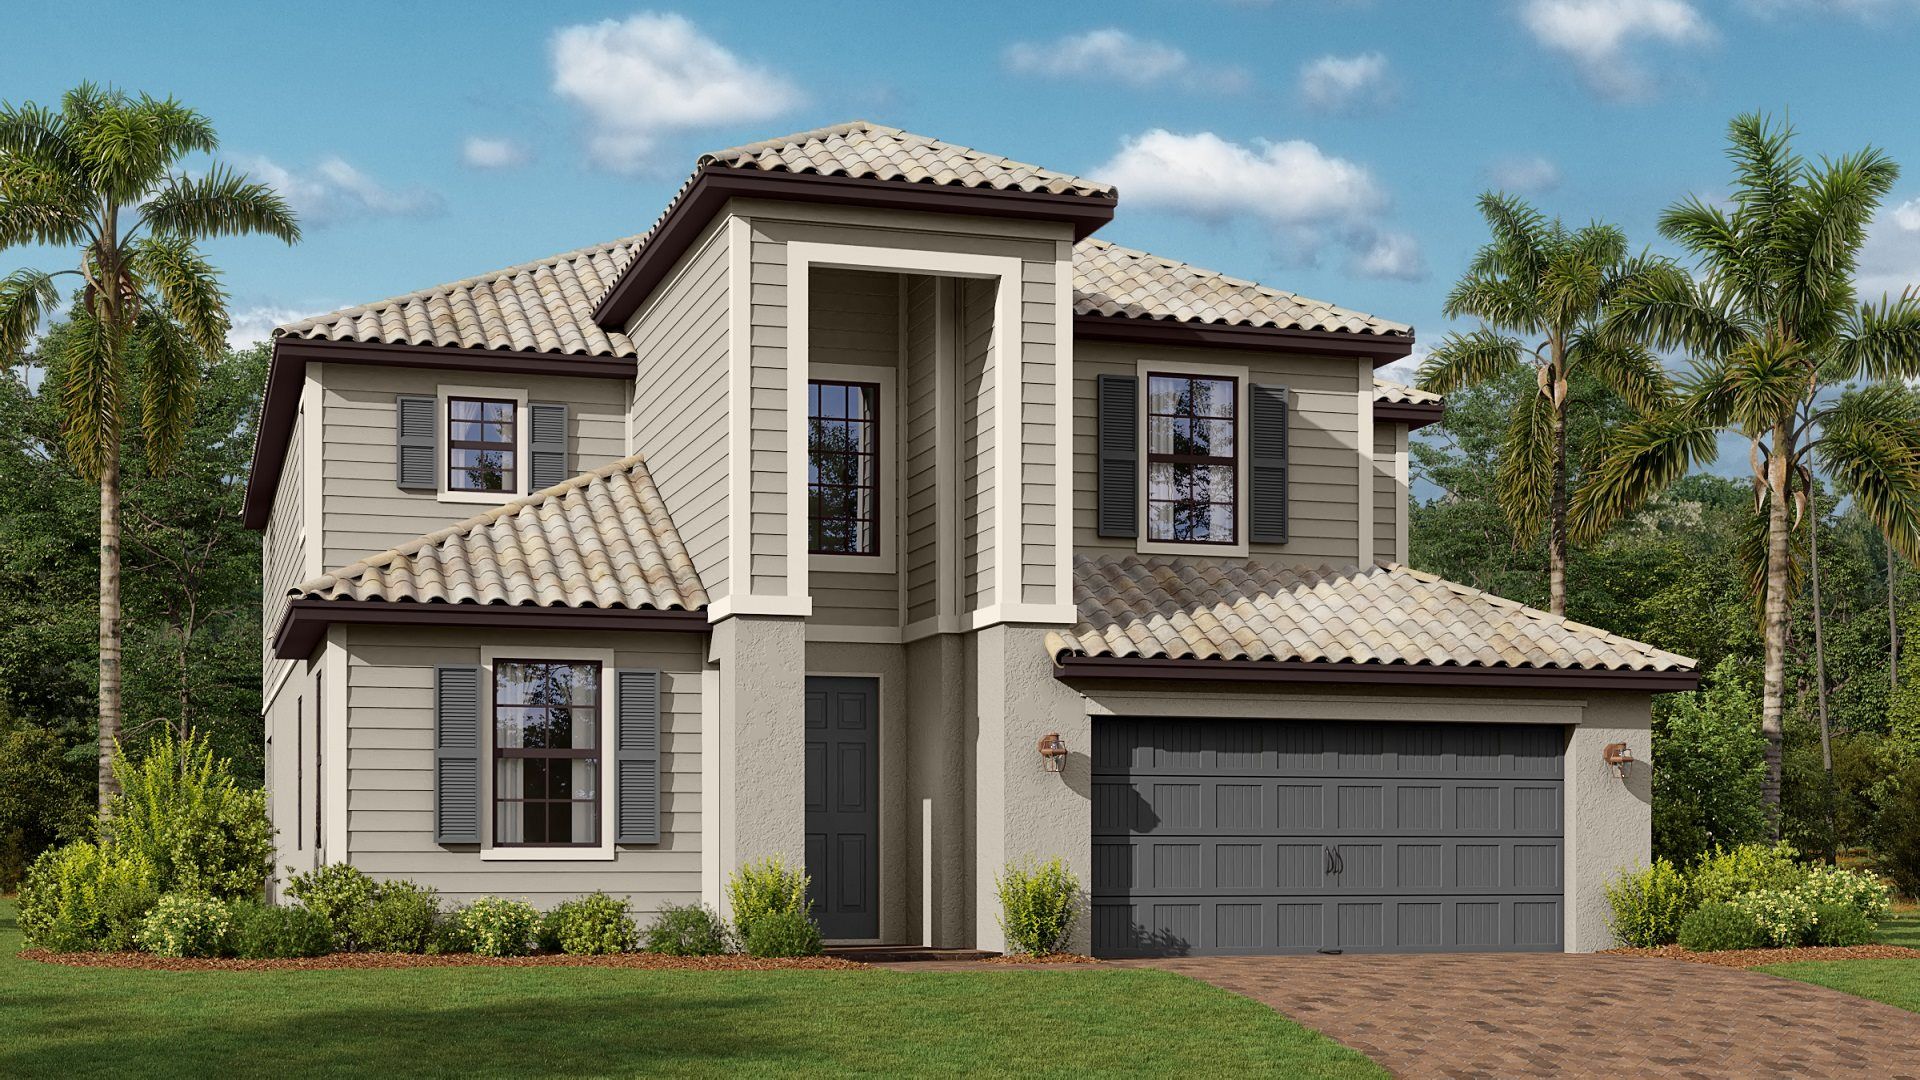 Elevation DS - Timber-Creek Executive Homes Monte Carlo BS